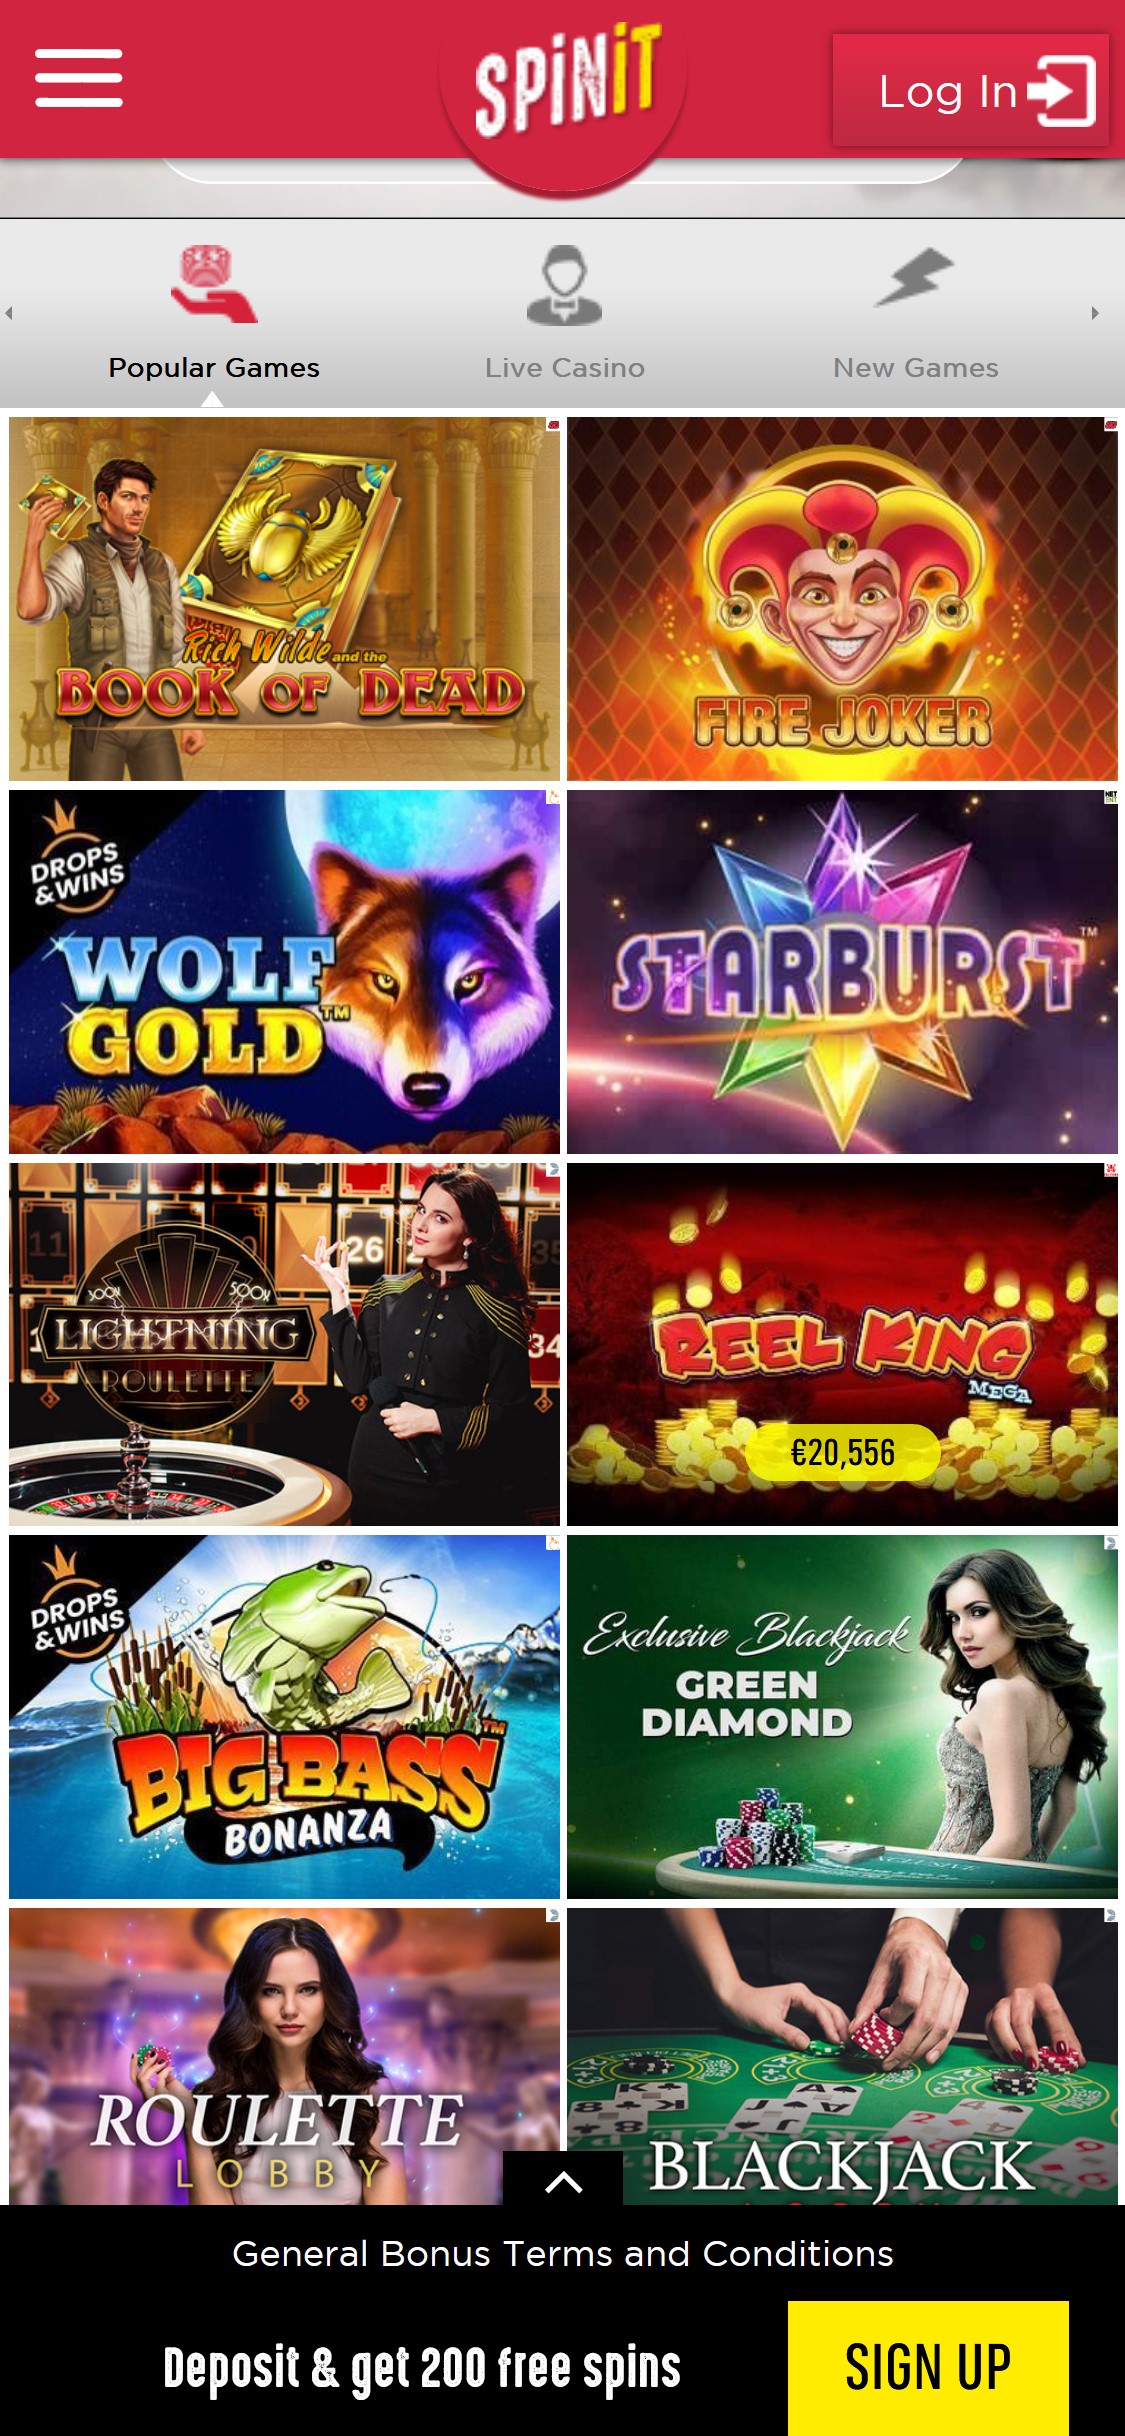 SpinIt Casino Mobile Games Review